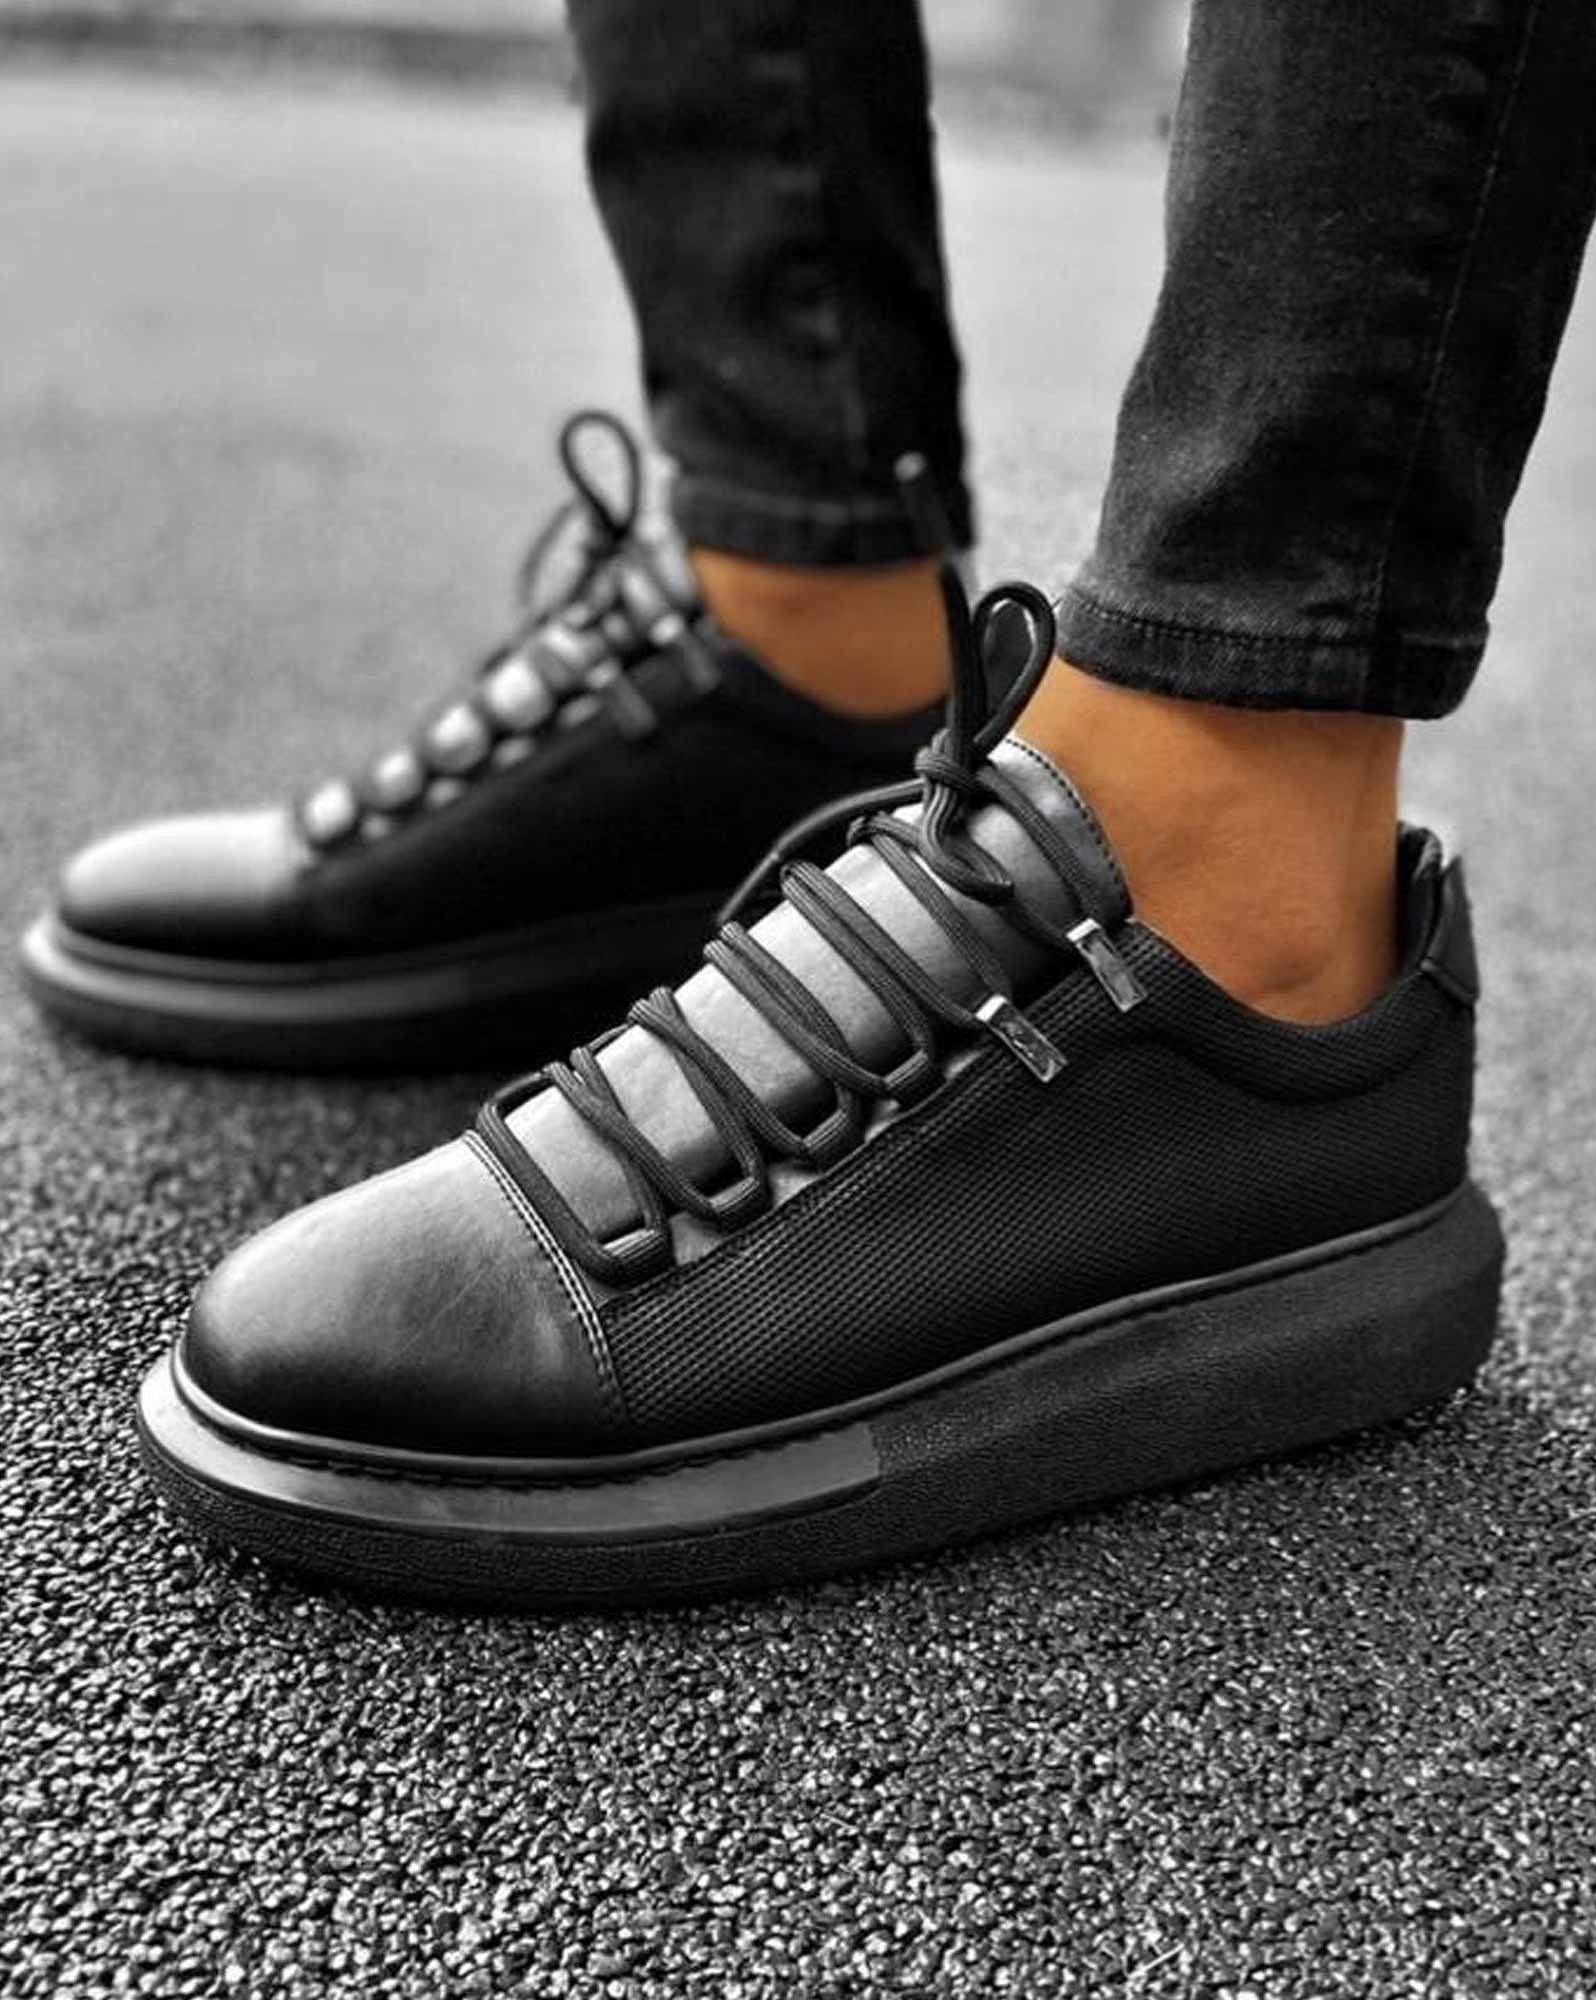 Men's sneakers with laces and black sole